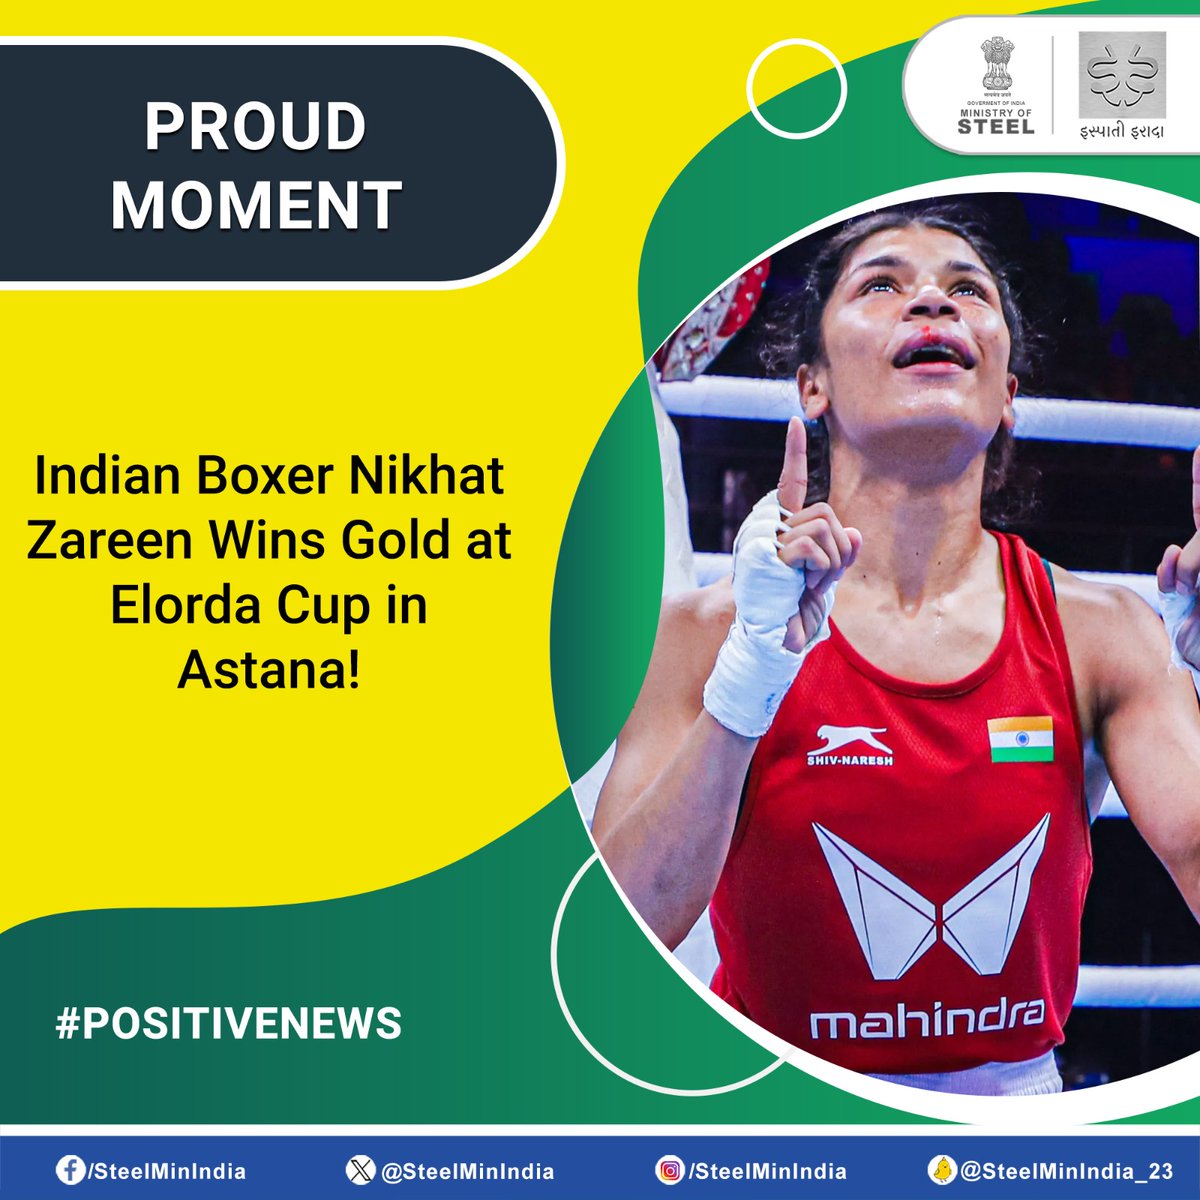 Indian boxer #NikhatZareen won a #gold medal in the 52kg category at the Elorda Cup in Astana, Kazakhstan. Congratulations on this outstanding performance! 🥊🥇🇮🇳 #PositiveNews